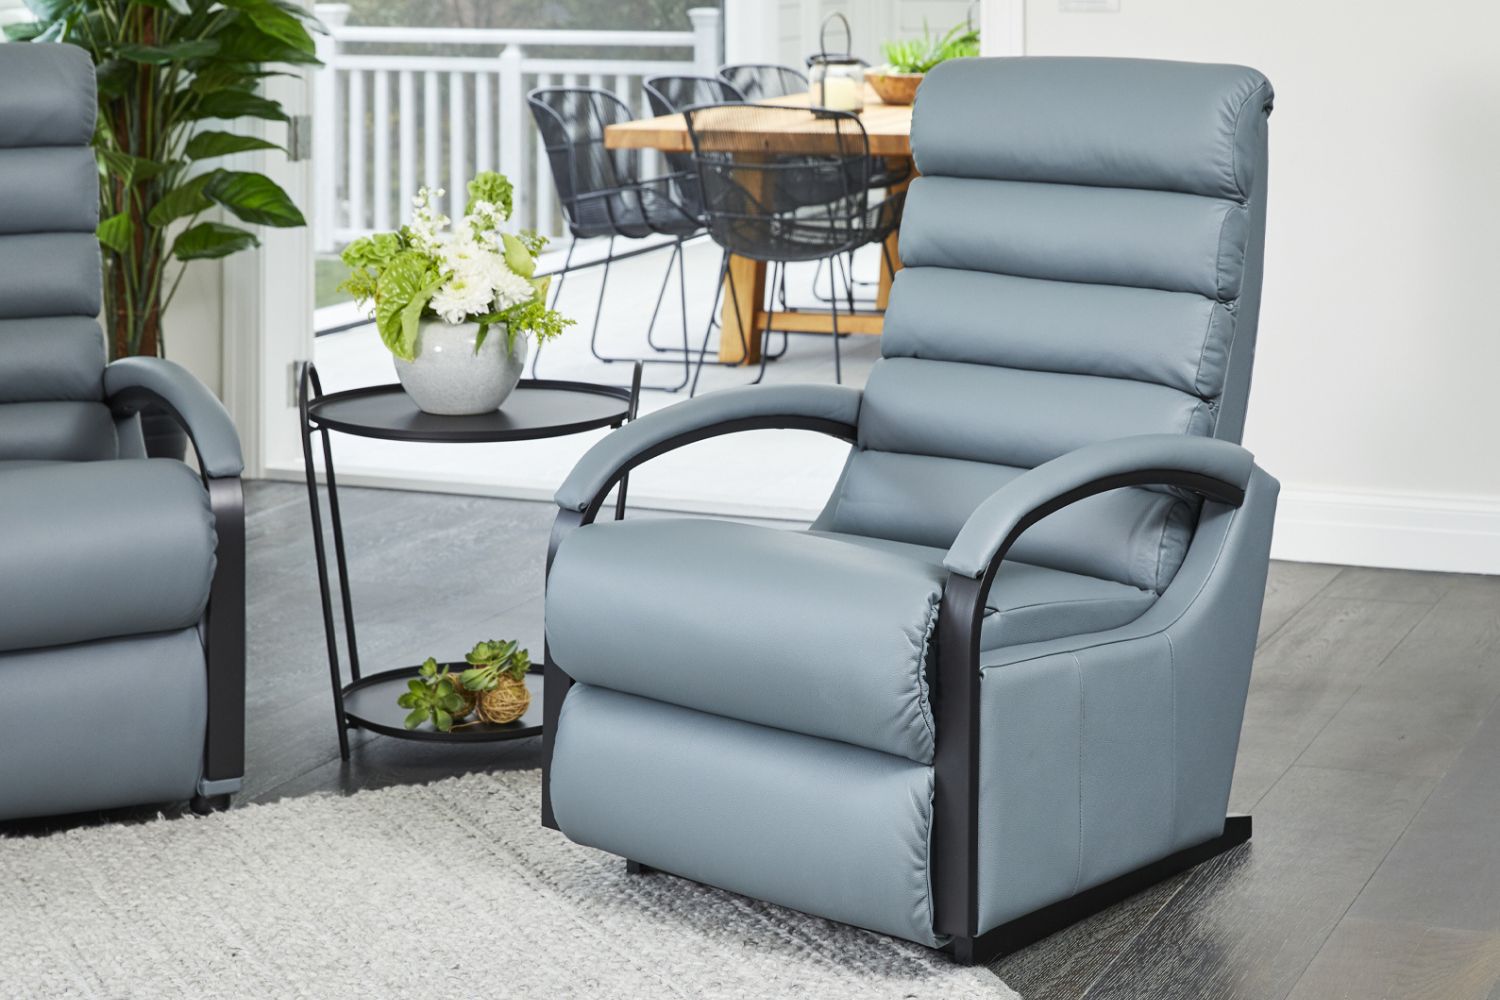 Ideal for small spaces, La-Z-Boy's Anika recliner is sleek, elegant and sophisticated.